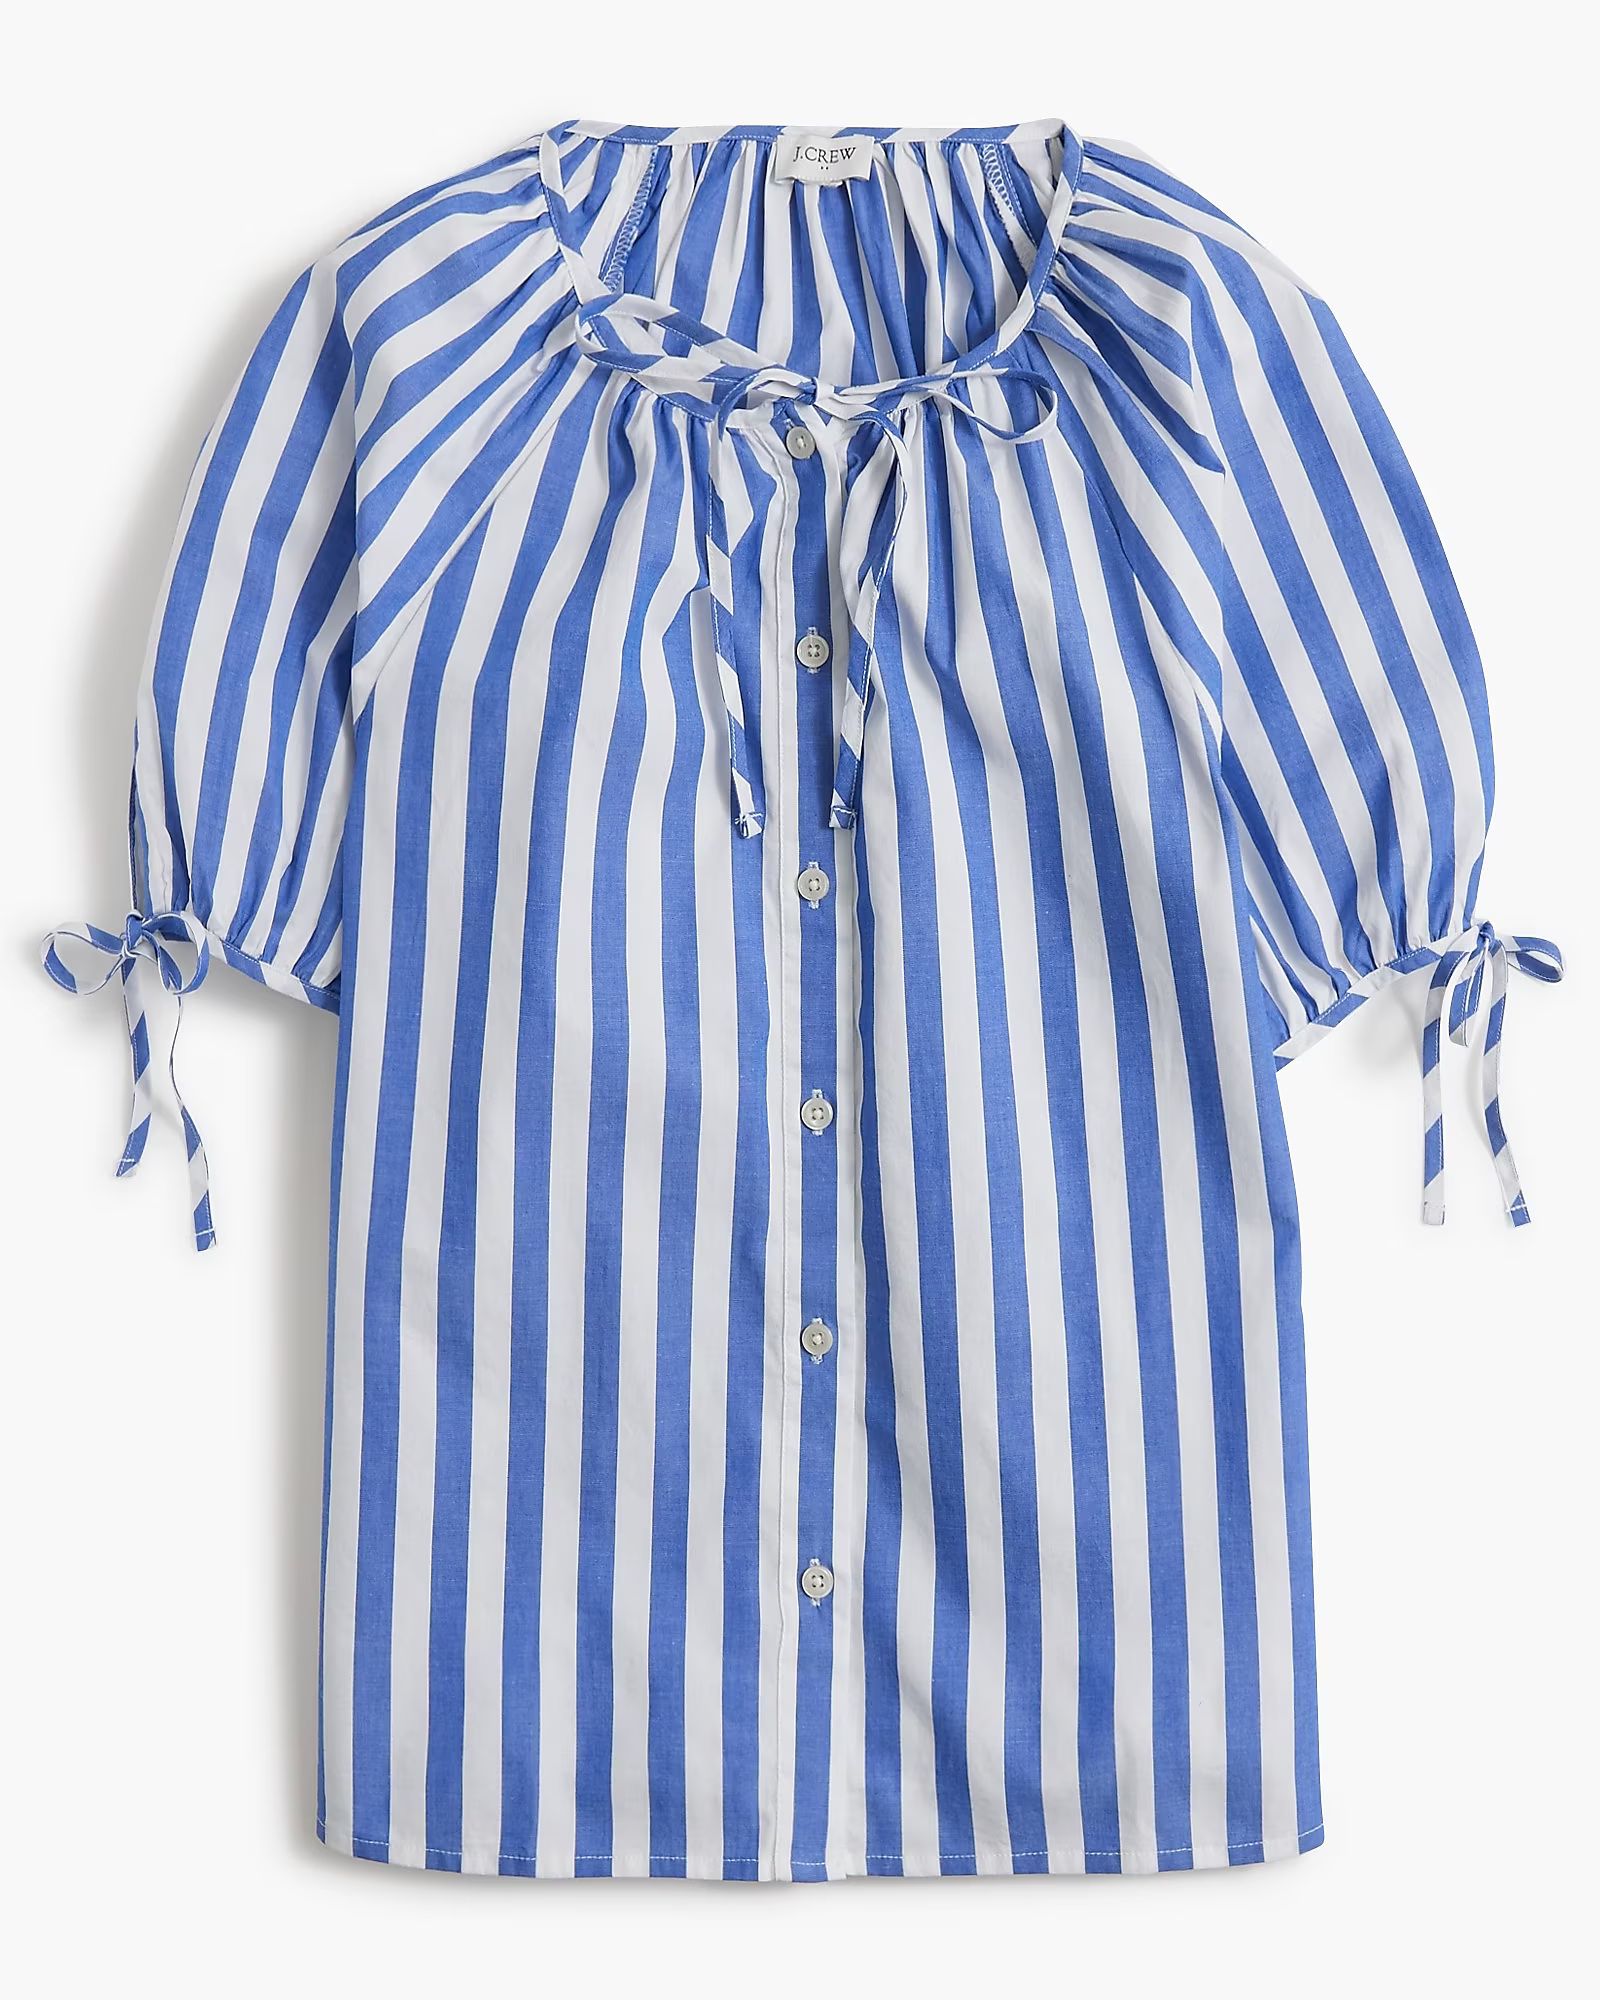 Button-front top with tie sleeves | J.Crew Factory